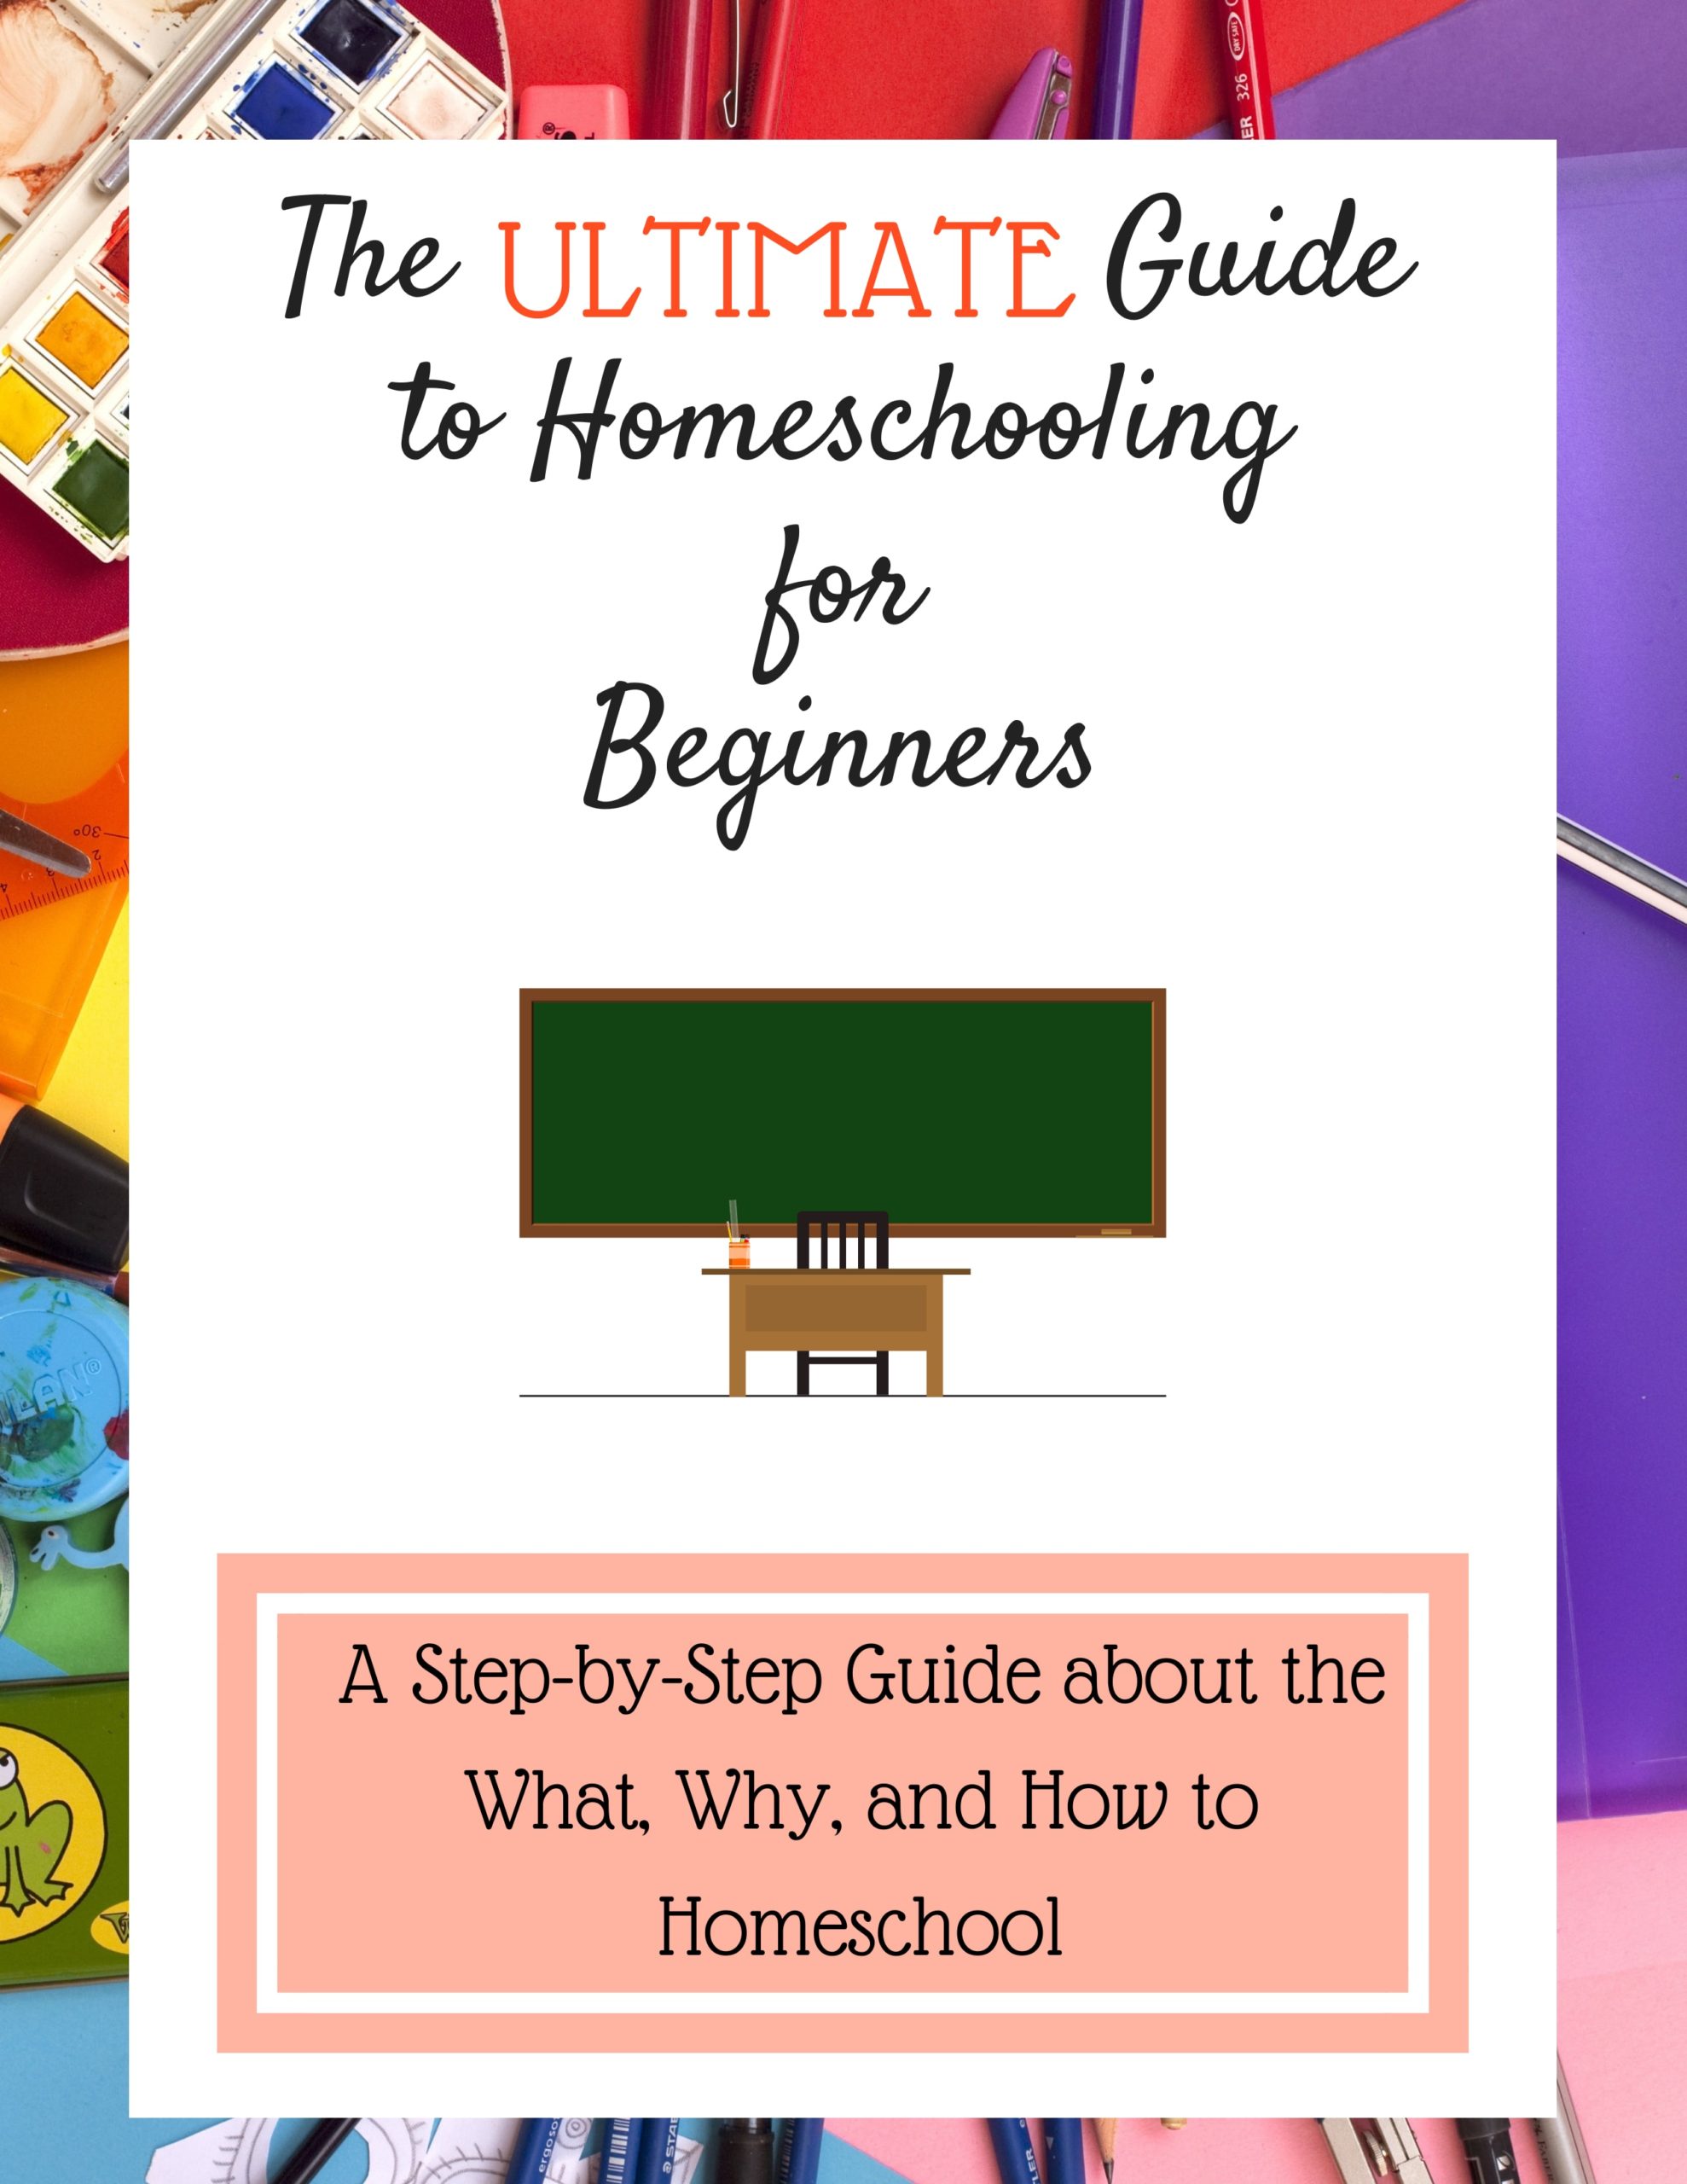 homeschool guide buddingmama everything you need to know to get started gomeschooling